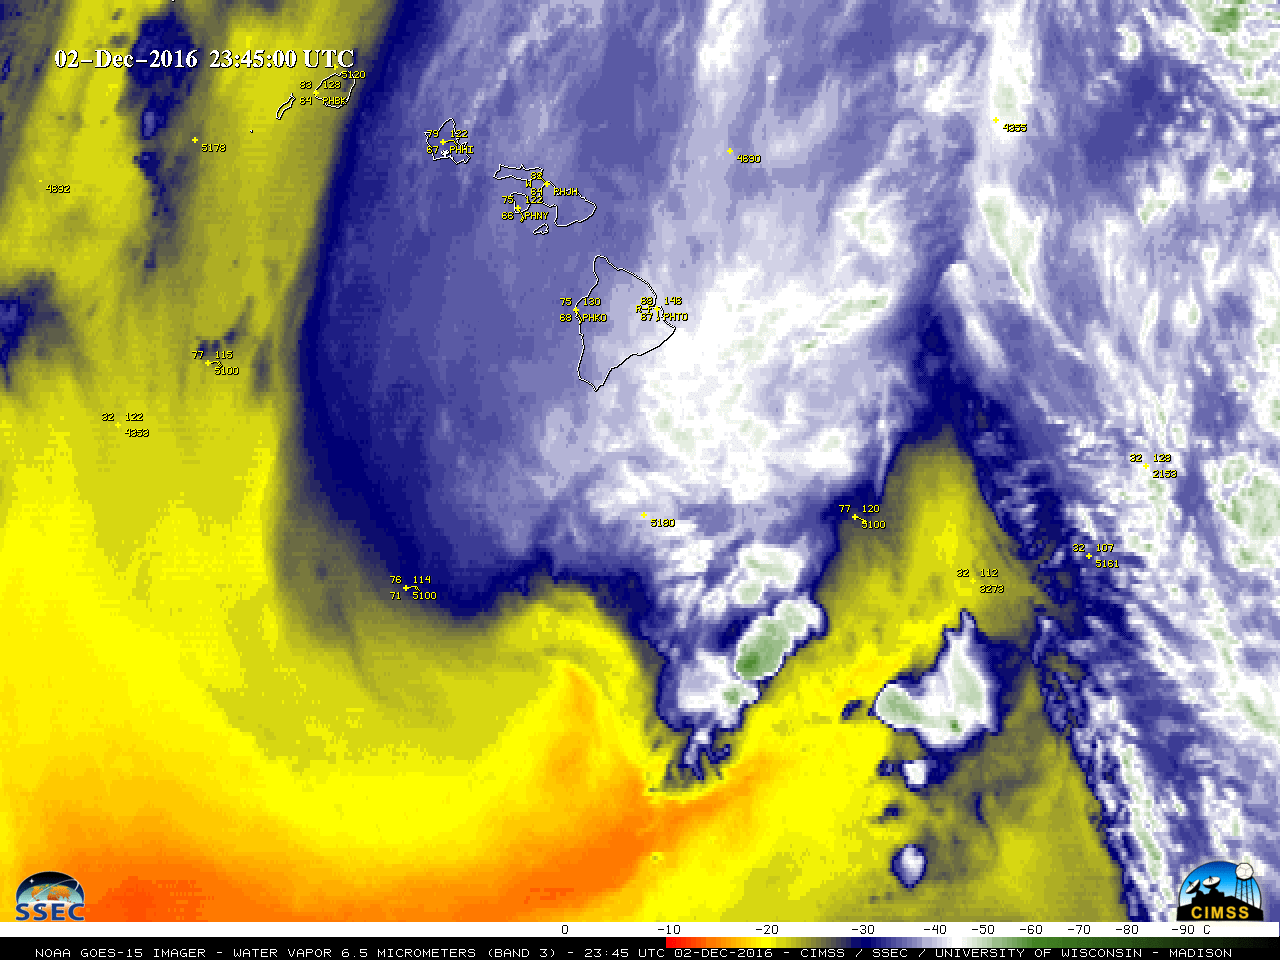 GOES-15 Water Vapor (6.5 µm) images, with hourly surface reports [click to play MP4 animation]